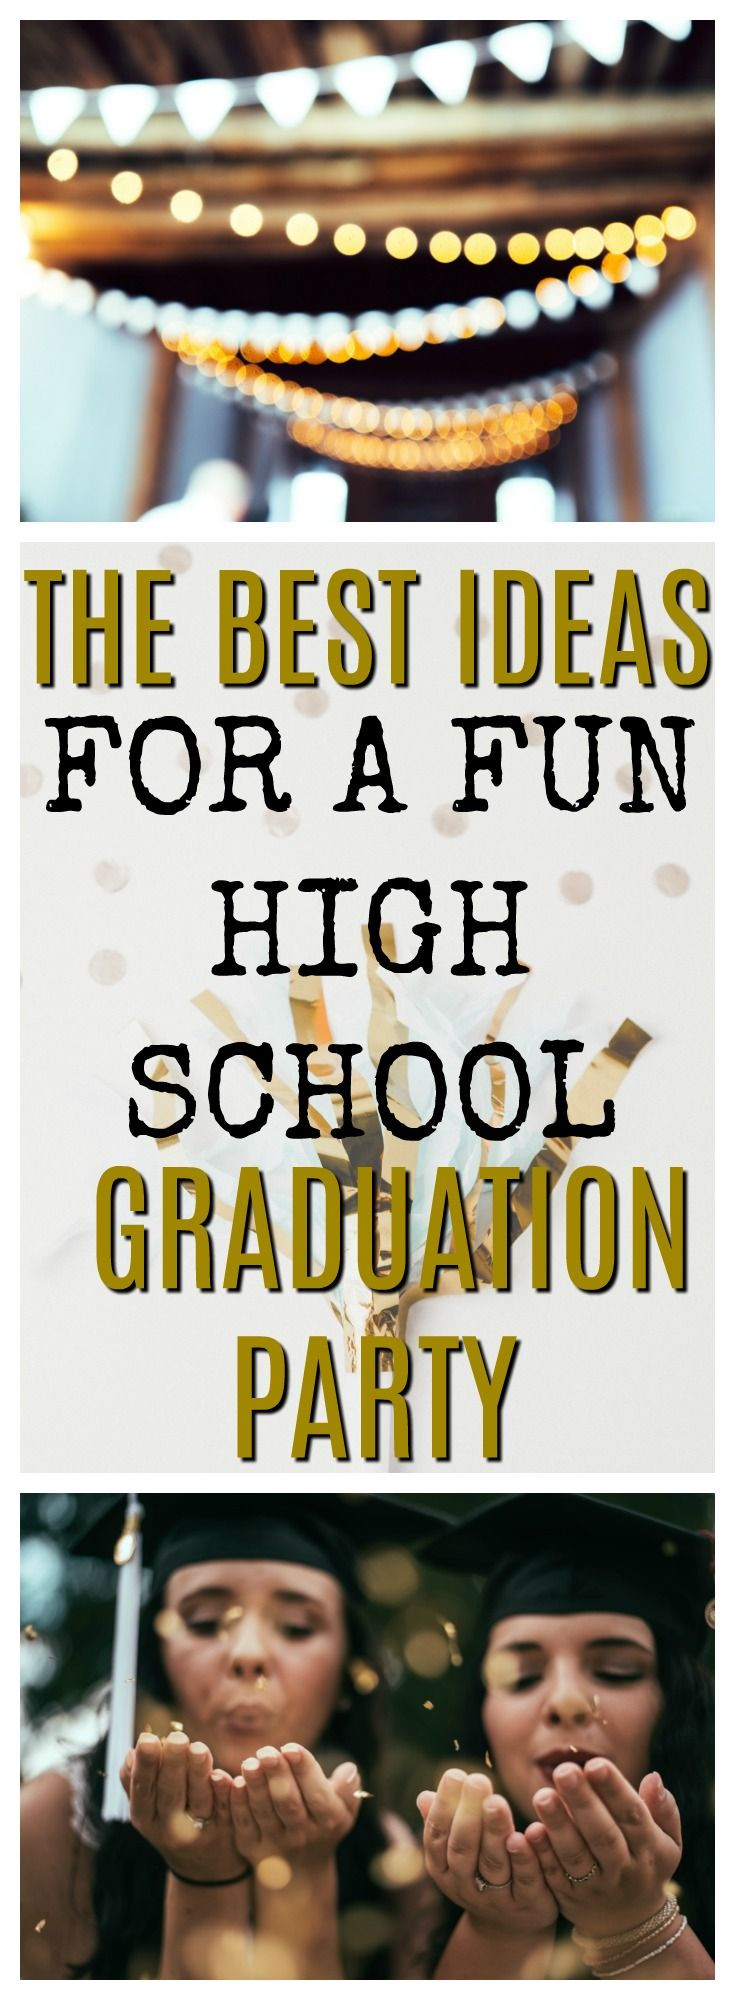 College Graduation Party Game Ideas
 Graduation Party Ideas 2020 How to Celebrate [step by